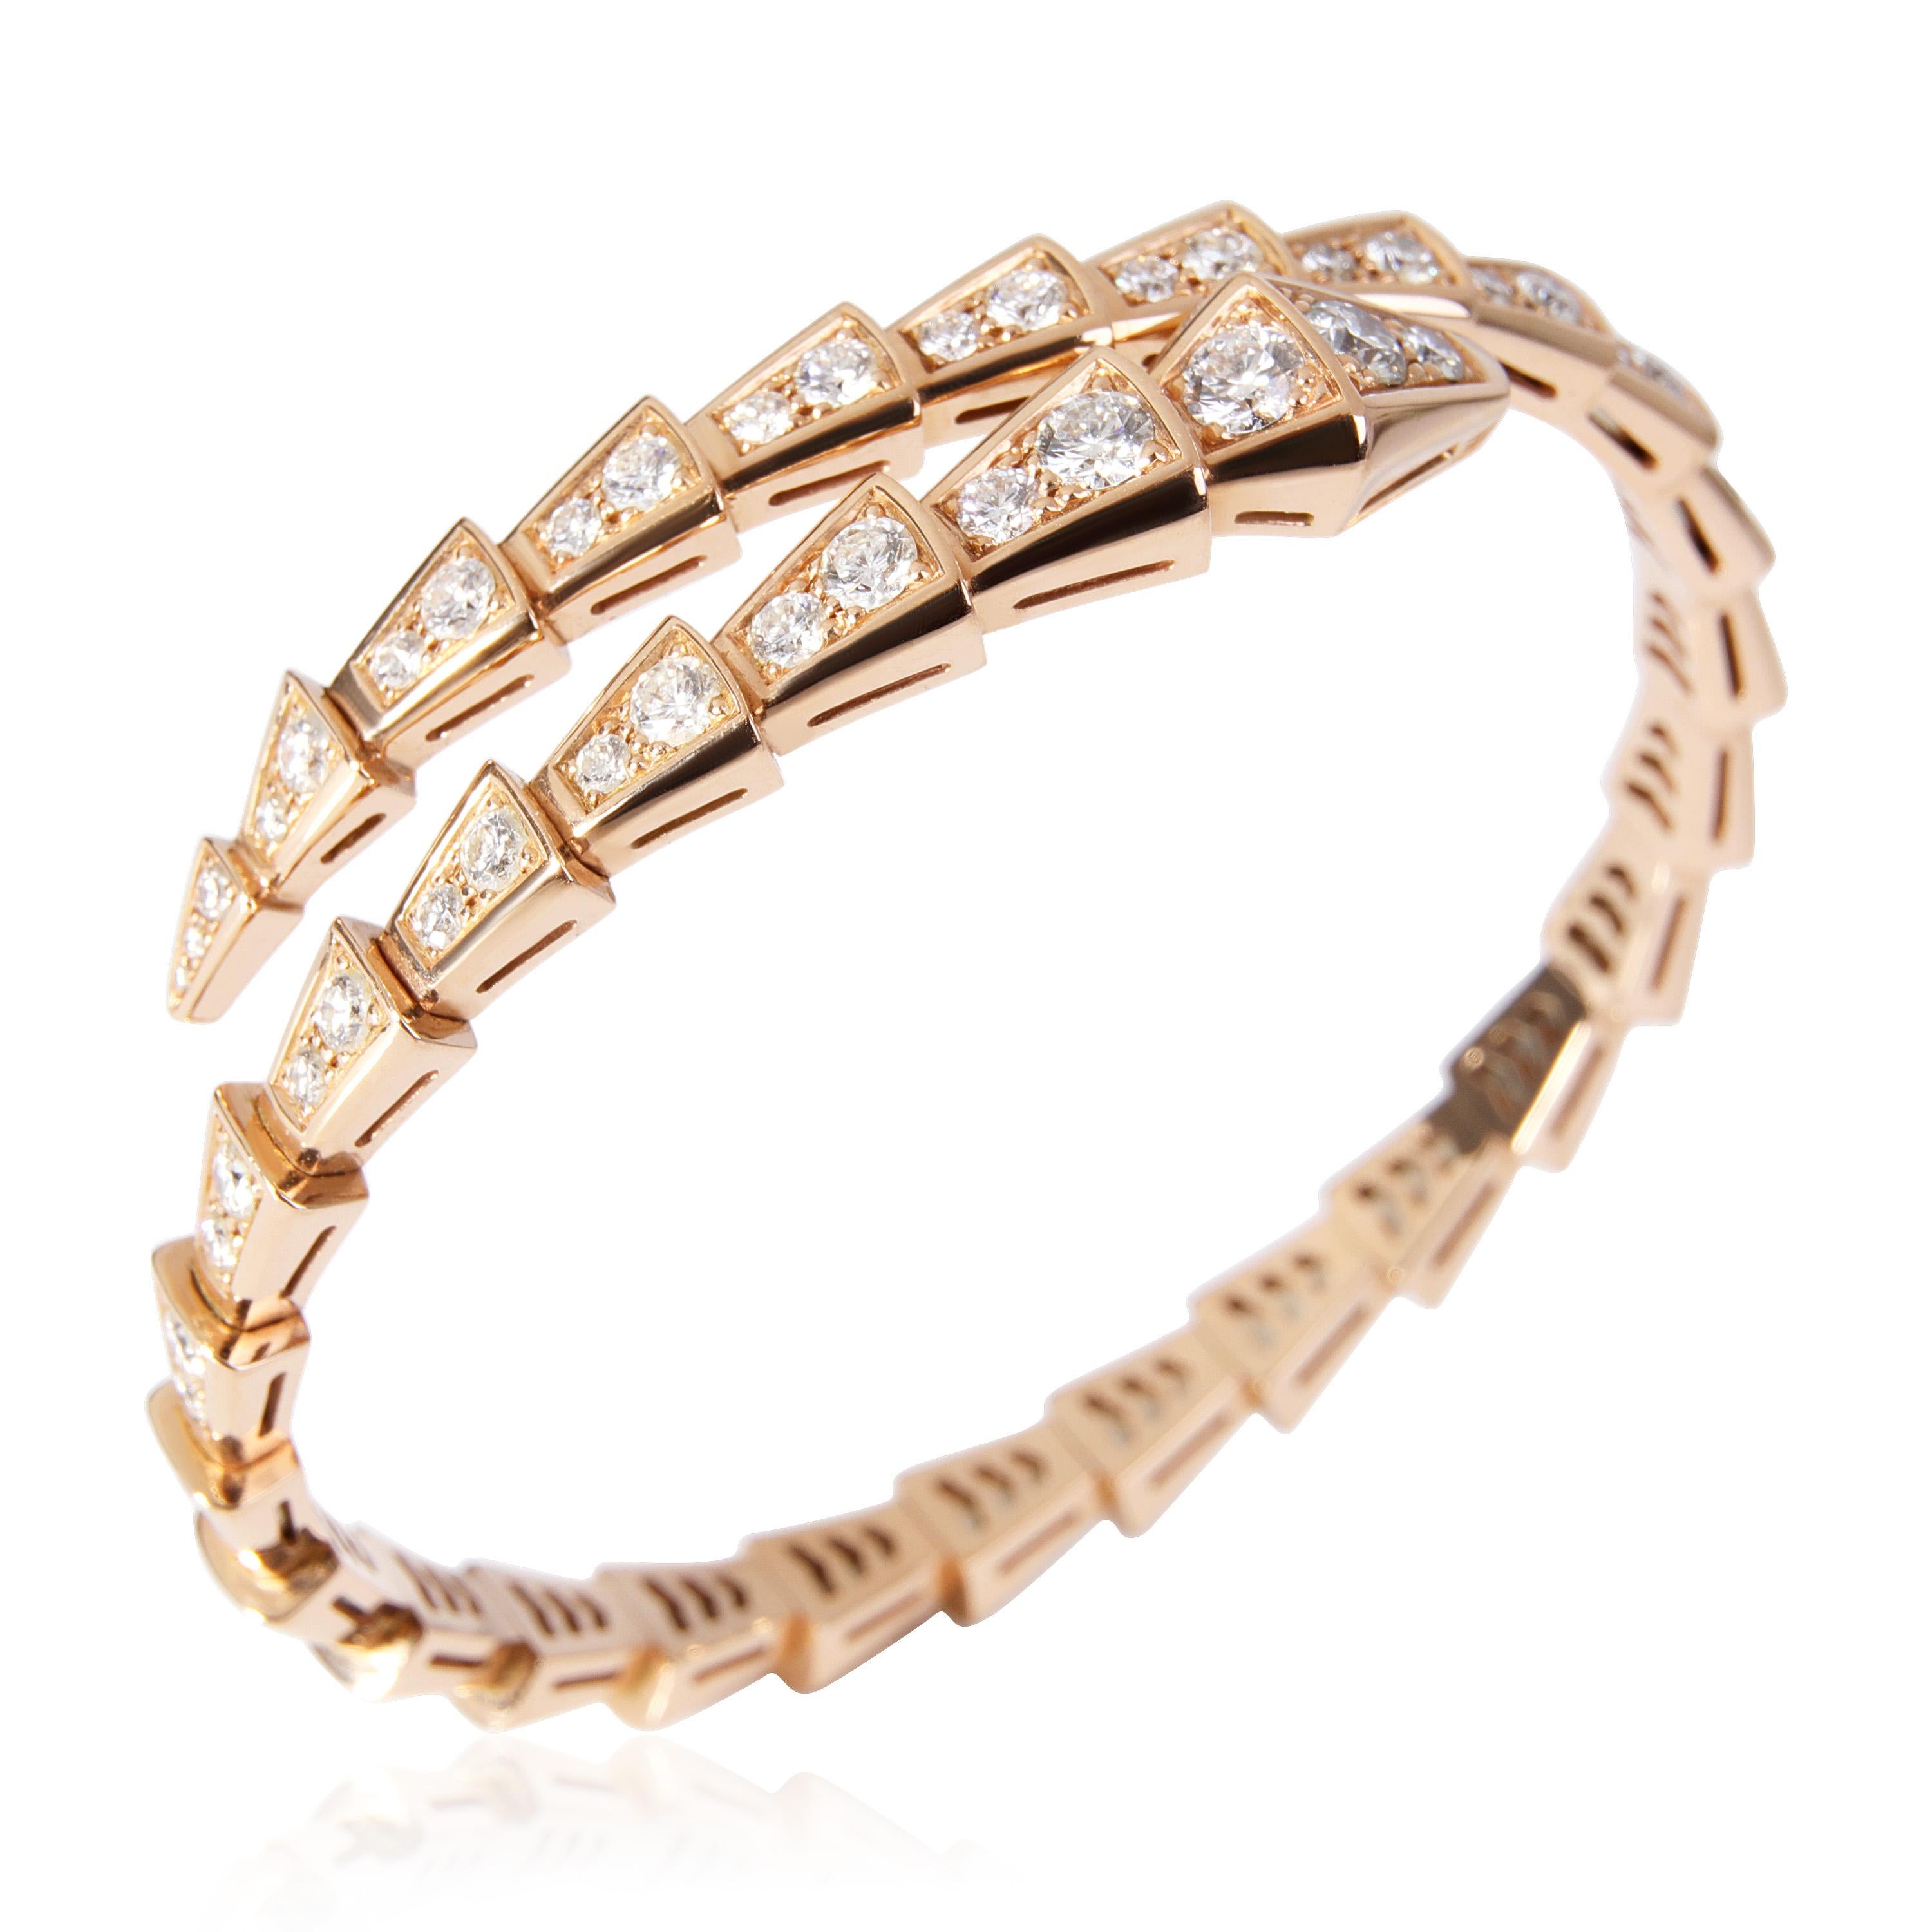 BVLGARI Serpenti Viper Diamond Bracelet in 18k Rose Gold

PRIMARY DETAILS
SKU: 121054
Listing Title: BVLGARI Serpenti Viper Diamond Bracelet in 18k Rose Gold
Condition Description: Retails for 30800 USD. In excellent condition. Will fit wrist up to